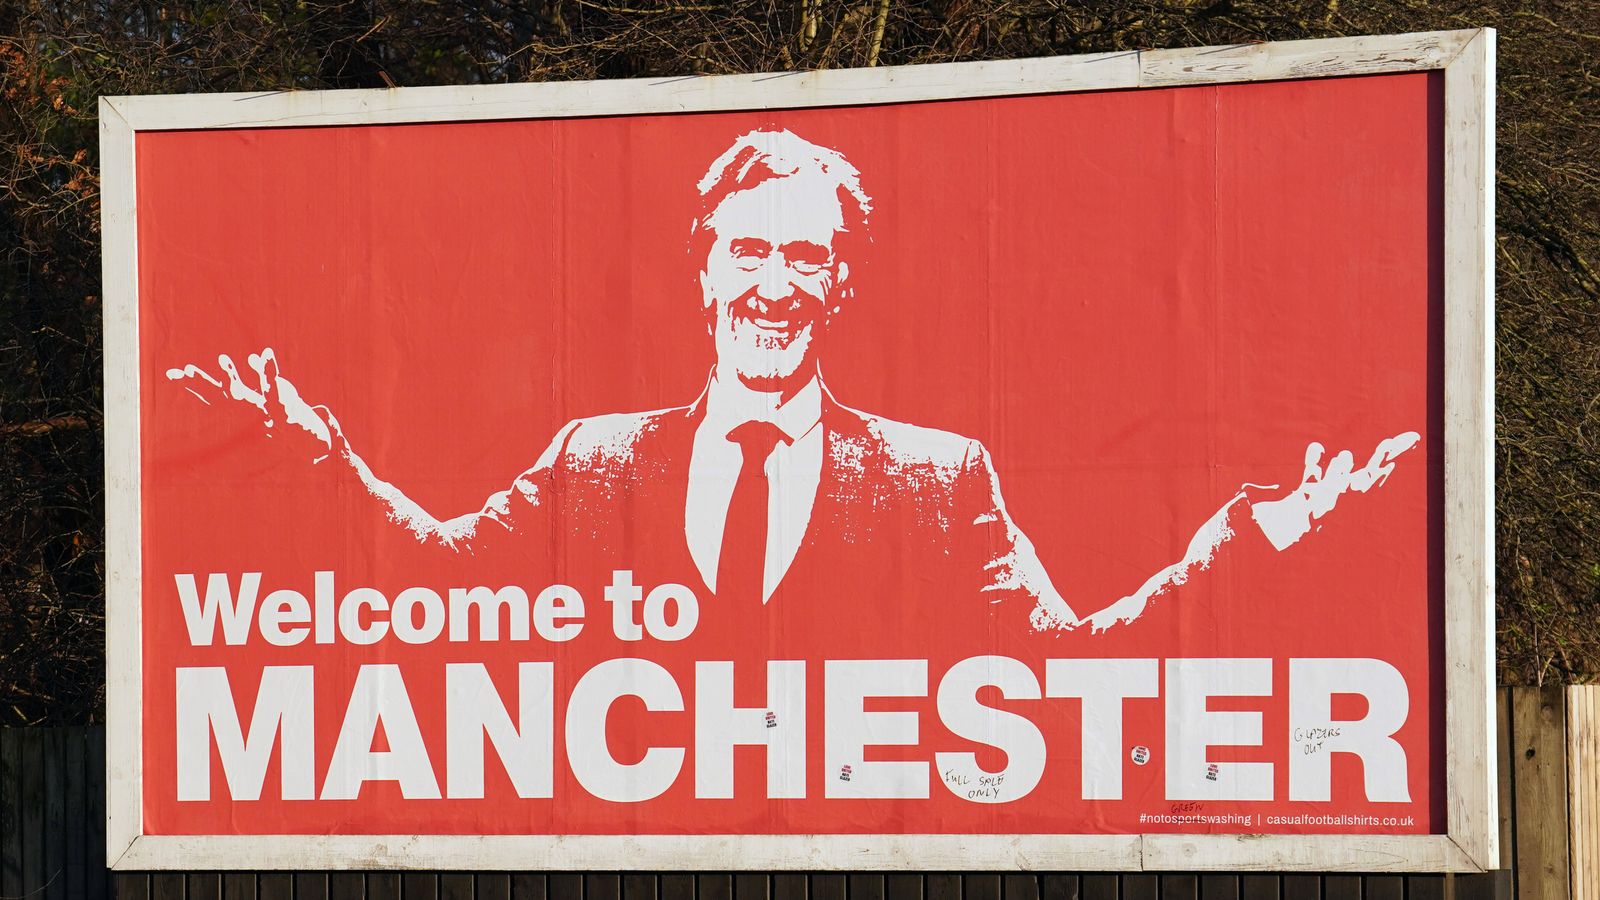 'Mixed feelings' from fans as Manchester United confirm sale of 25% stake to British billionaire Sir Jim Ratcliffe